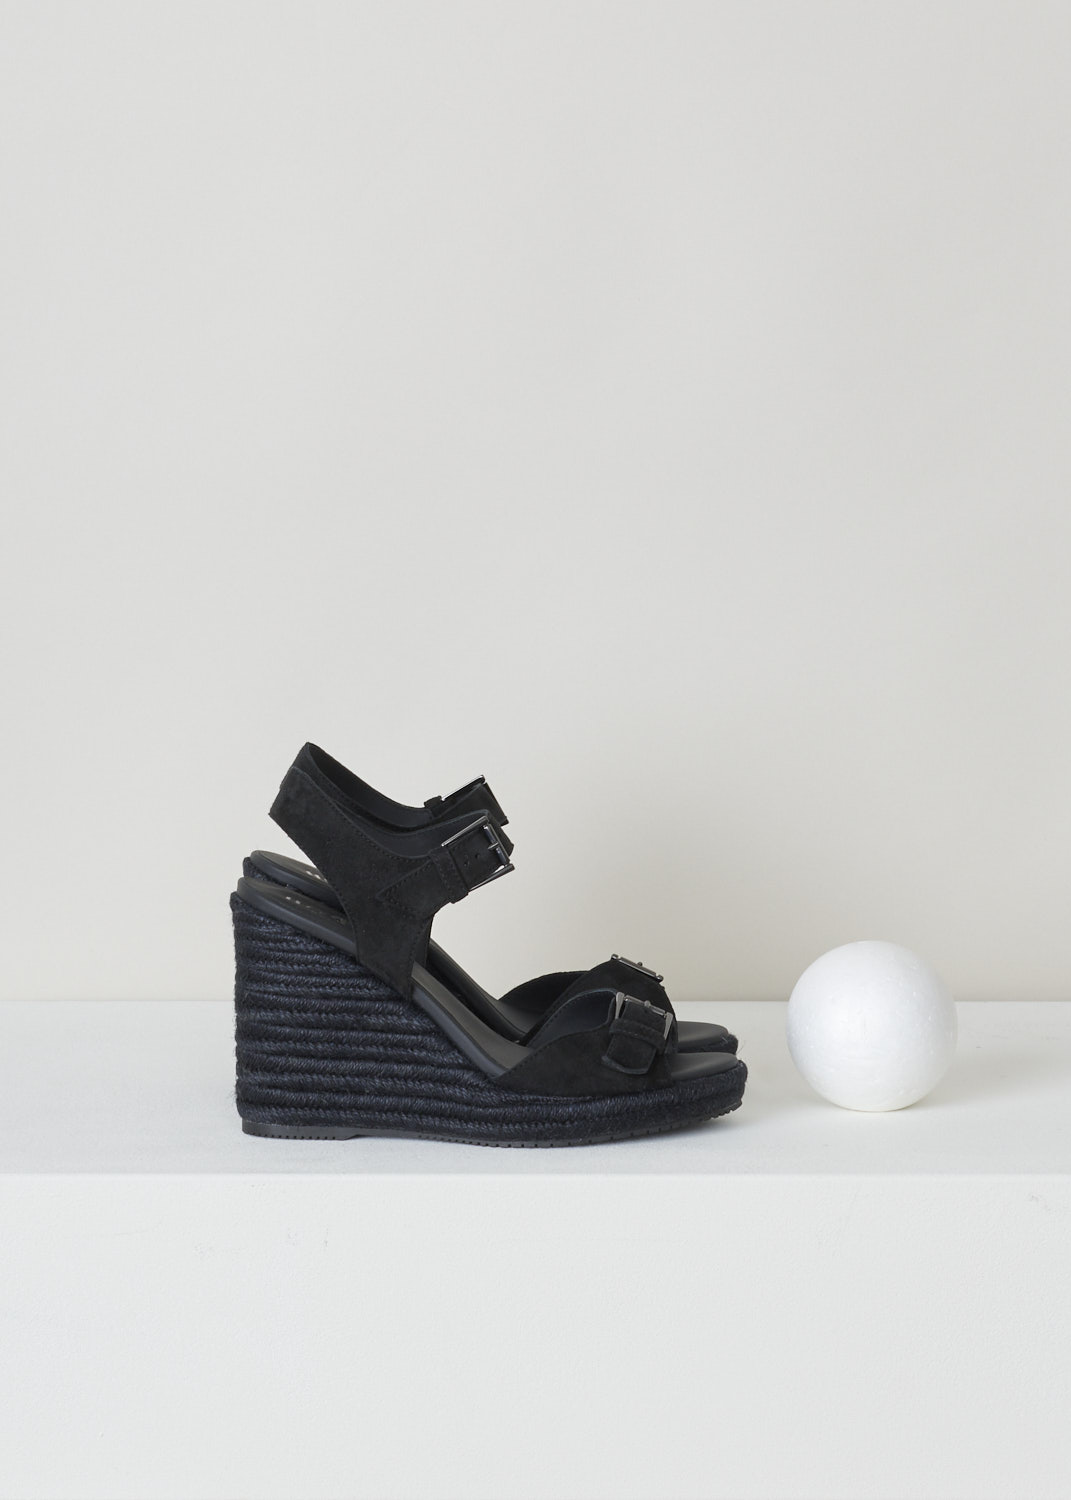 Hogan, Wedge heeled sandals, HXW5580DL20CR0B999_H558_CR0_nero, black silver, side, These lovely black wedge heeled sandals fills us all with summer vibes. Featuring a single strap over the vamp with an ornamental buckle also coloured black. The ankle strap however, has a functional buckle, it is coloured black and acts as your fastening option. 

Heel height: 11 cm / 4.3 inch. 